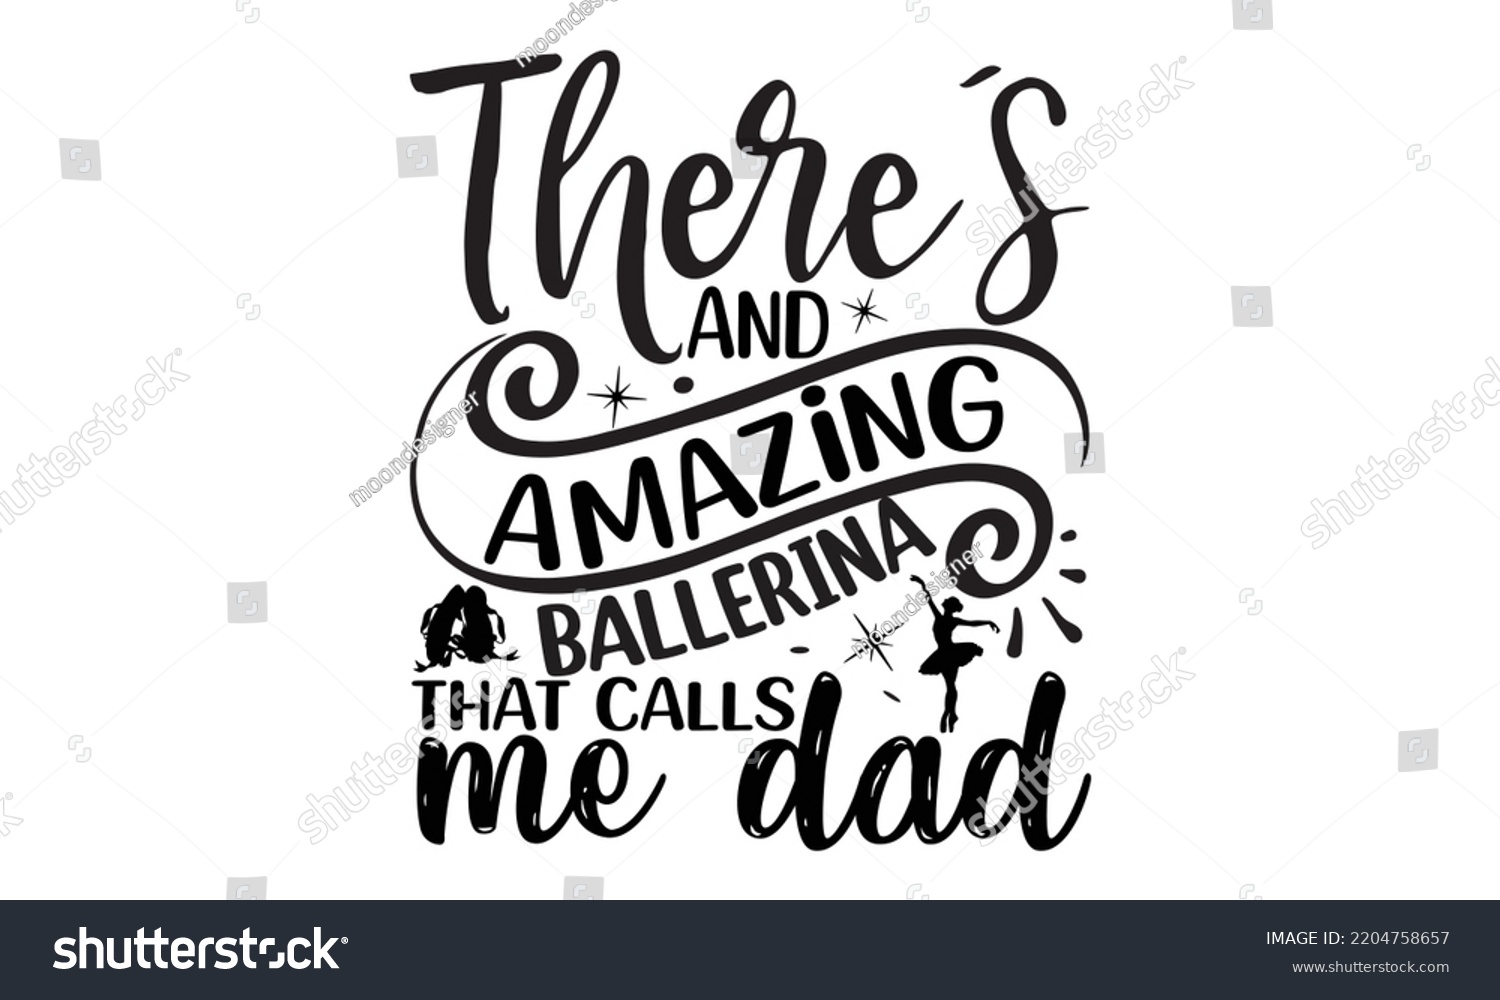 SVG of There’s and amazing ballerina that calls me dad  - Ballet svg t shirt design, ballet SVG Cut Files, Girl Ballet Design, Hand drawn lettering phrase and vector sign, EPS 10 svg